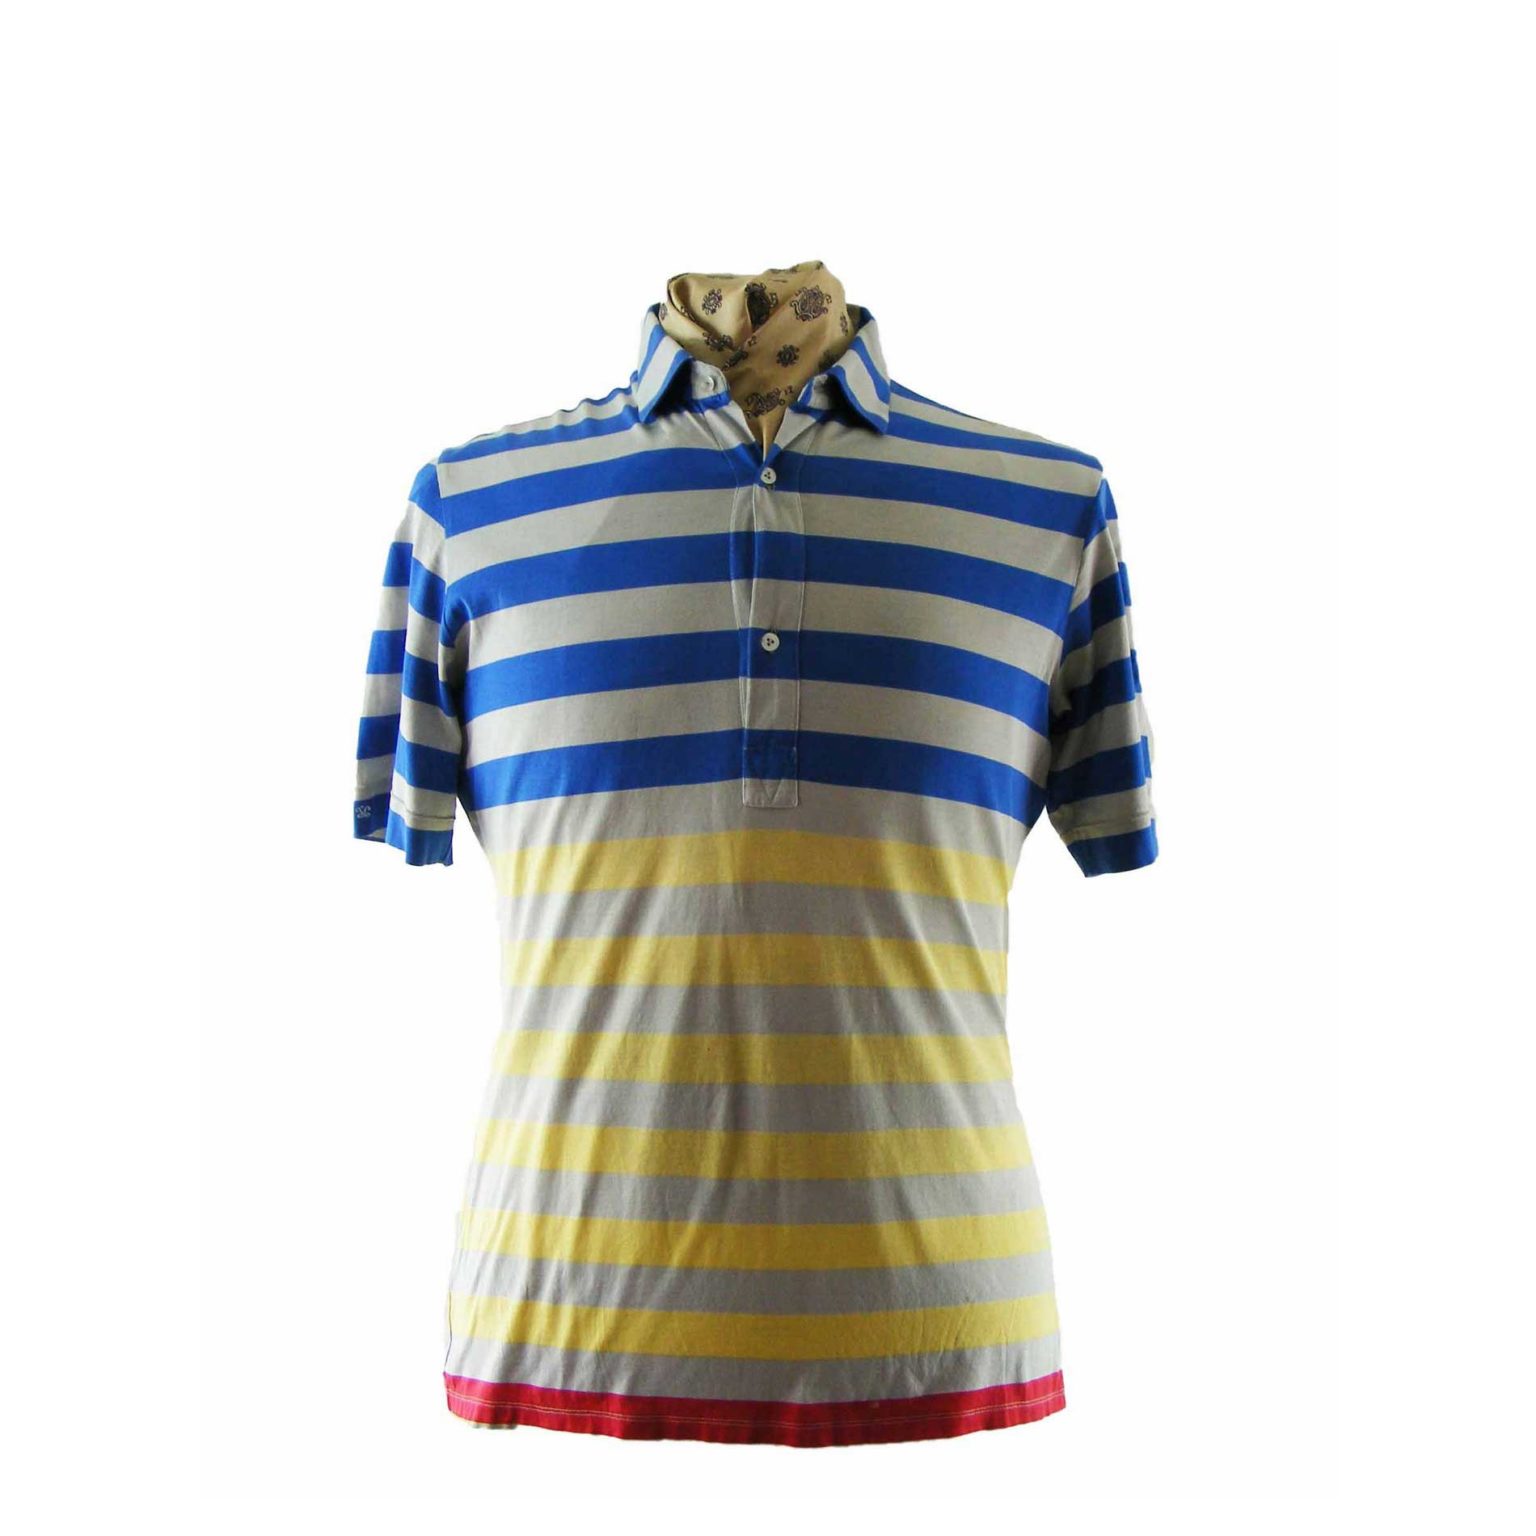 90s Multicolored Striped Cotton Polo Shirt - M - Blue 17 Vintage Clothing